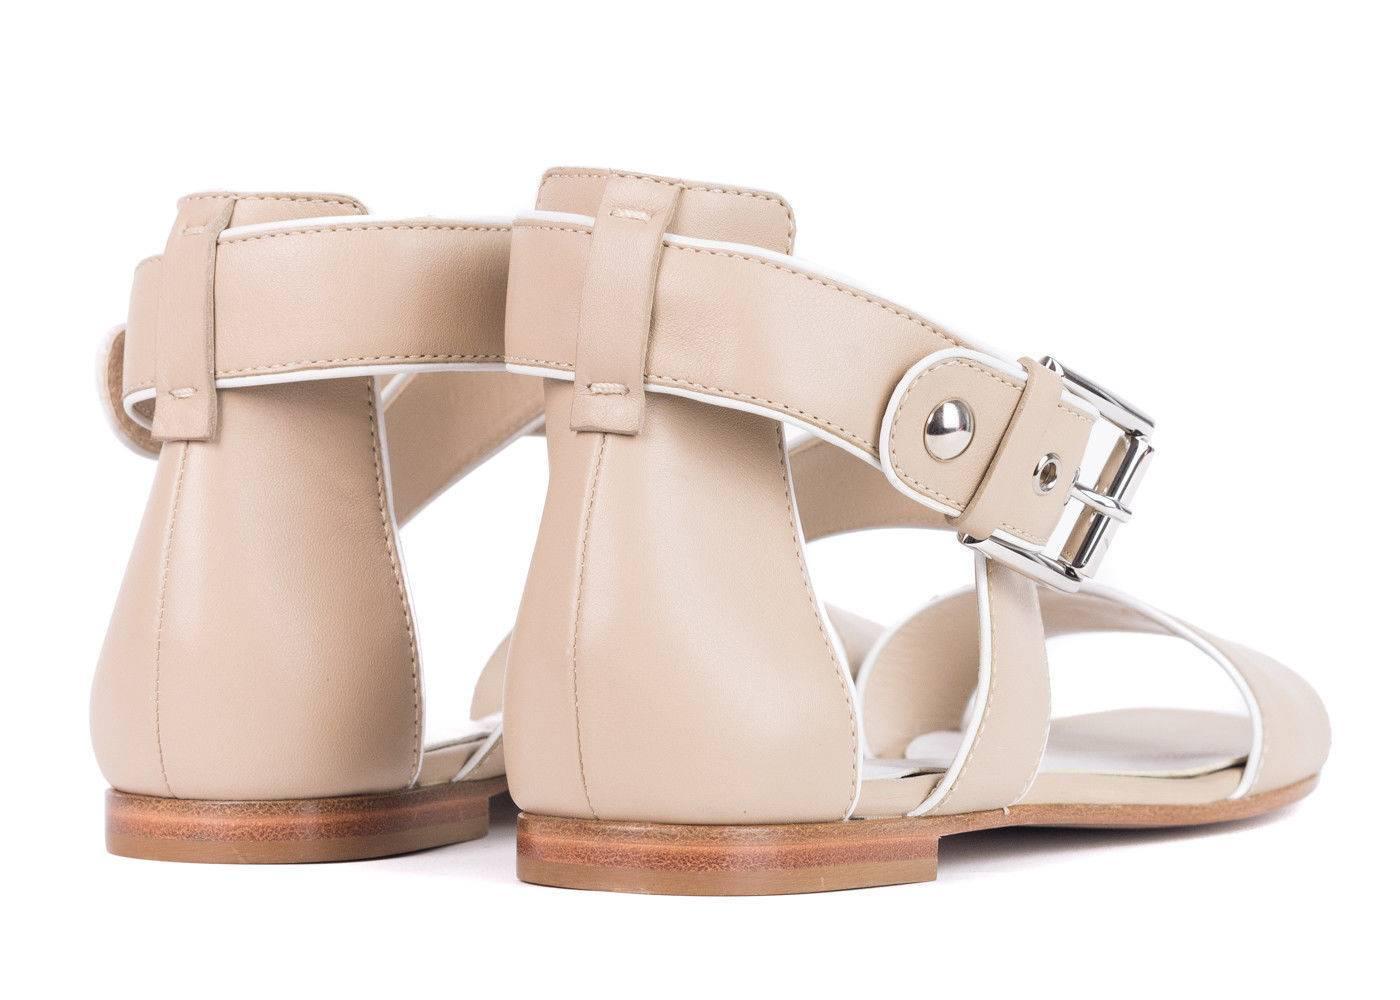 Gianvito Rossi Leather Sandals features a thick toe band and crisscross ankle straps with an adjustable buckle for comfortable wear. Gianvito adds a modern touch to this gladiator sandal silhouette with contrasting white piping along the straps.